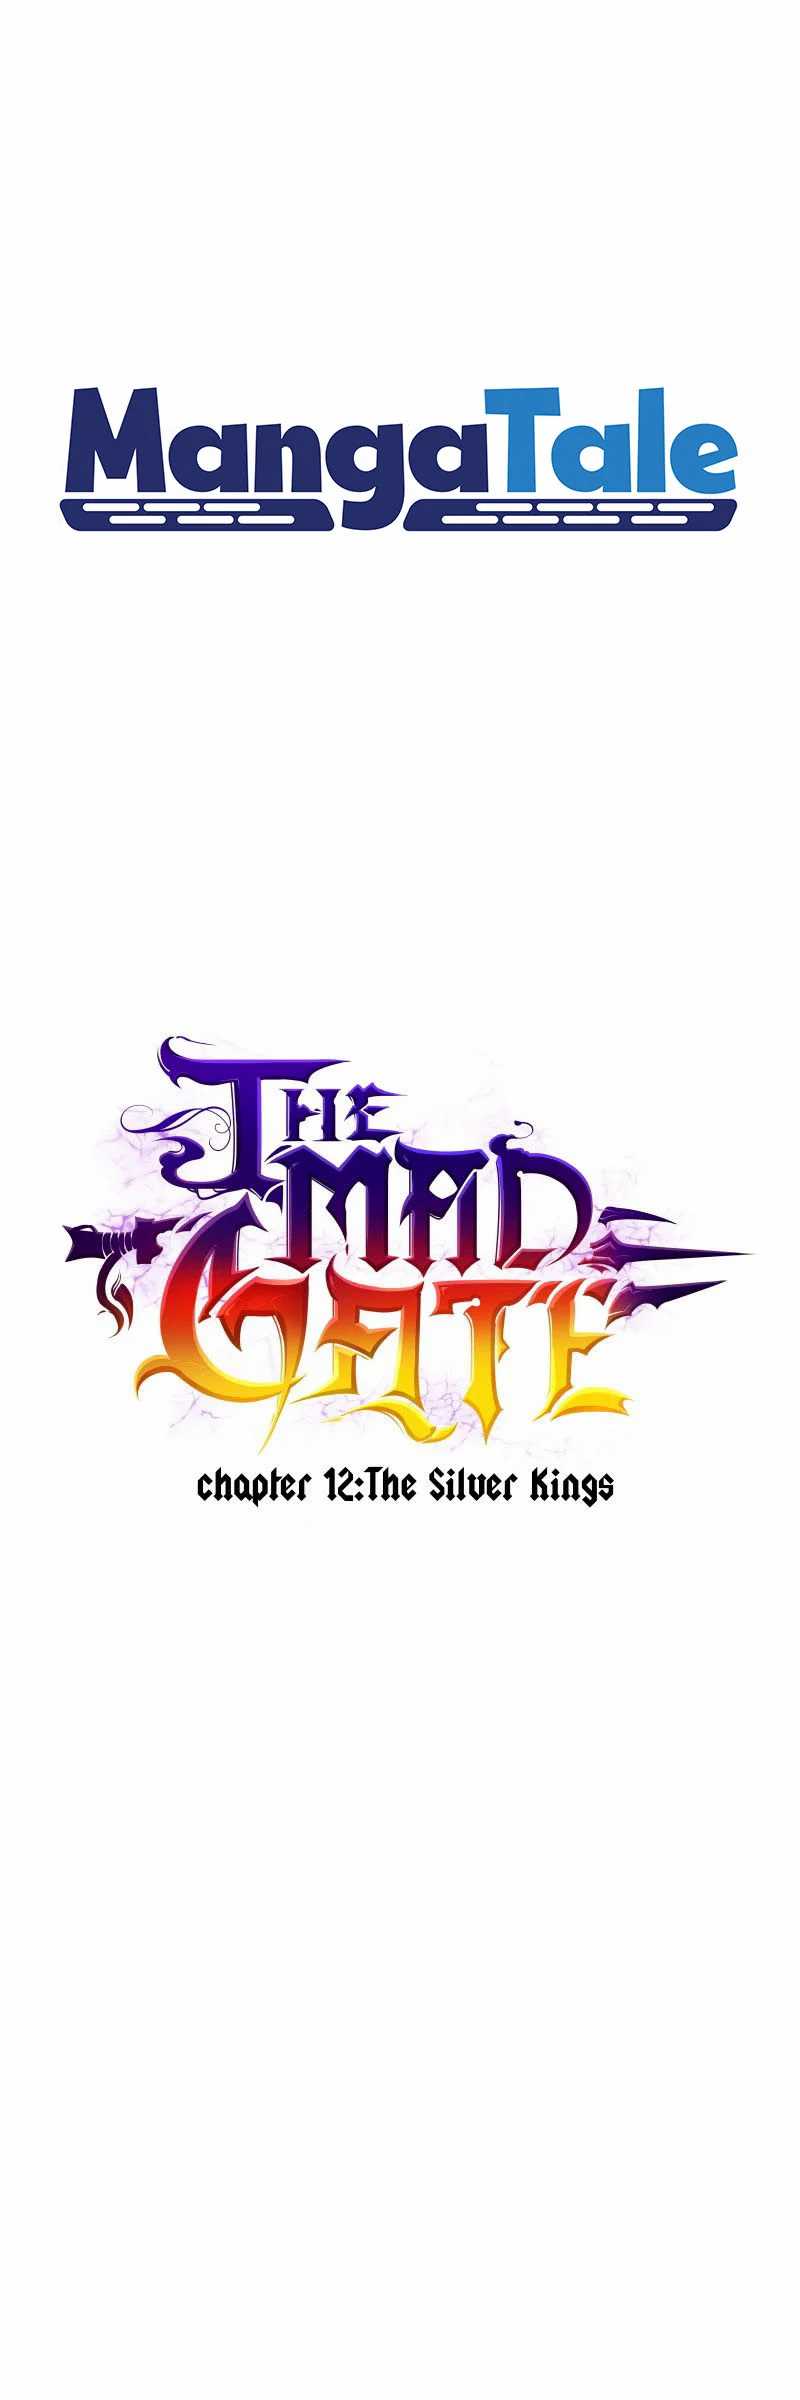 The Mad Gate Chapter 12